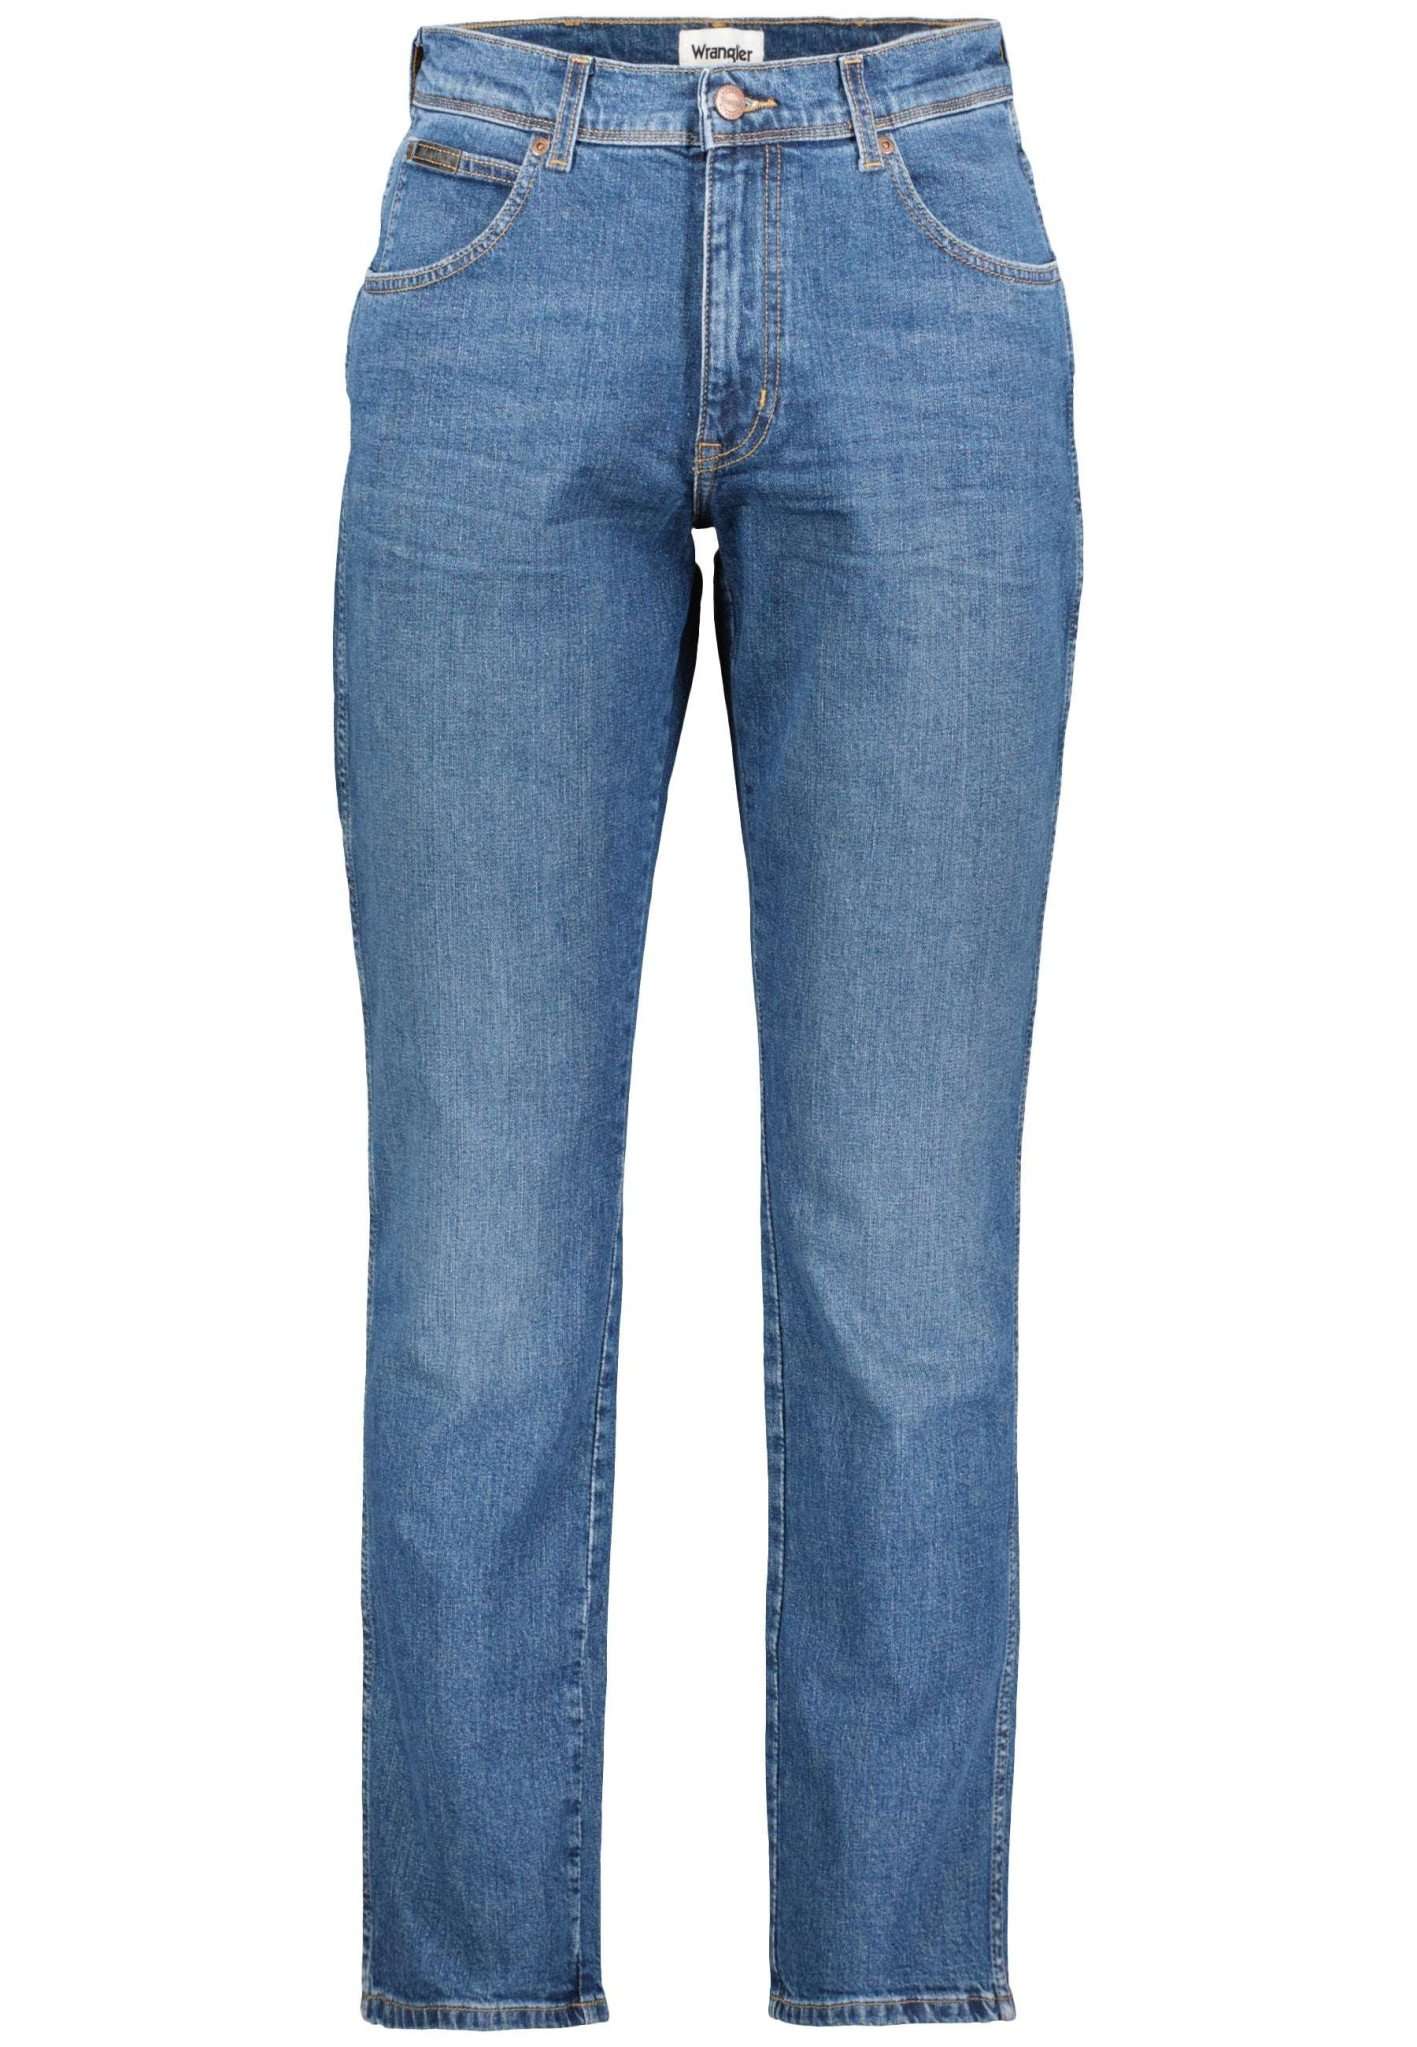 Texas Slim Low Stretch in Bruised Blue Jeans Wrangler   